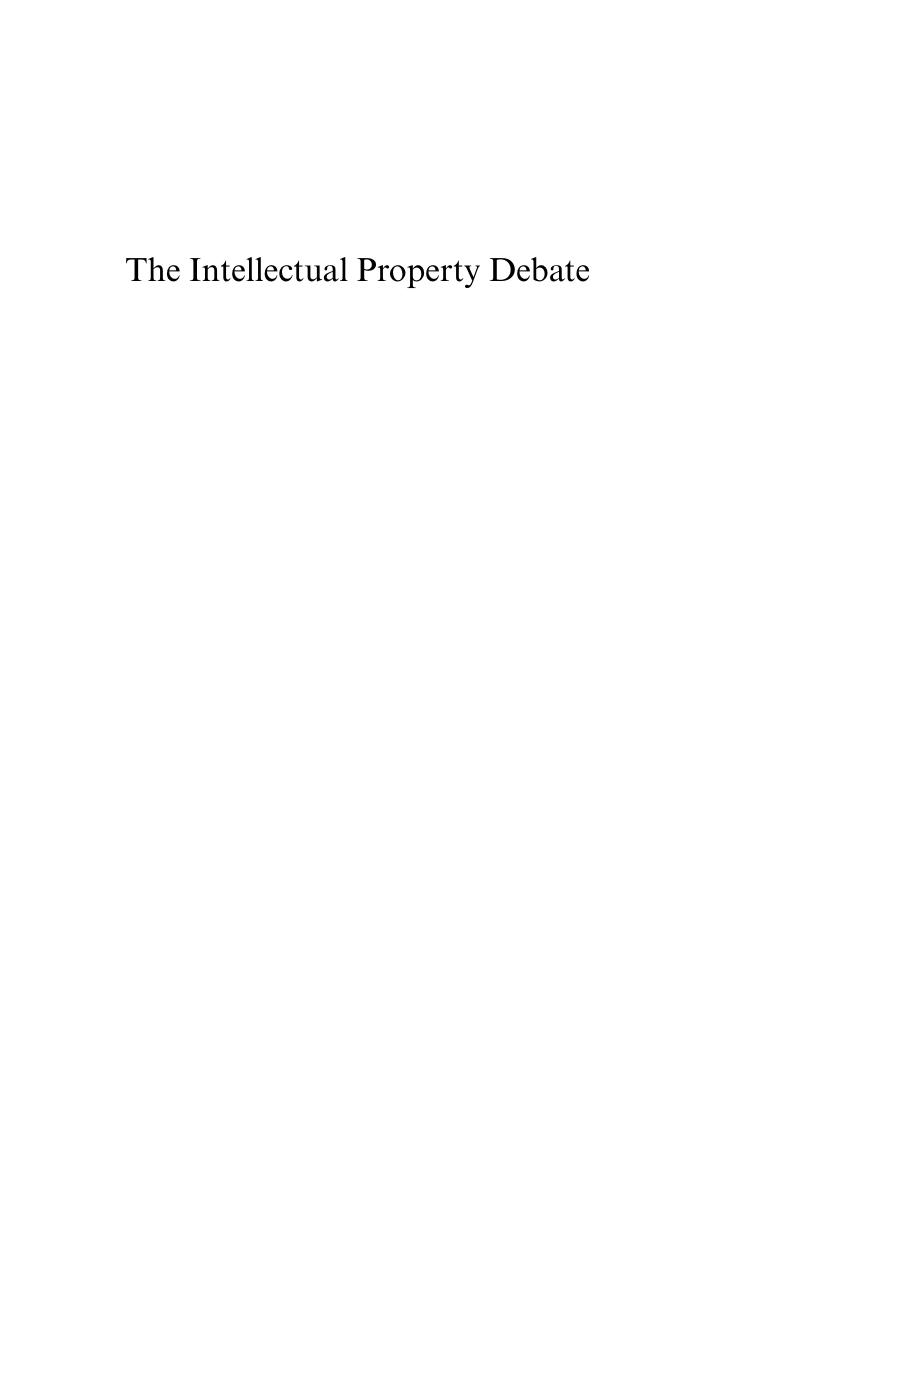 The Intellectual Property Debate Perspectives from Law, Economics And Political Economy (New Horizons in Intellectual Property) 2006